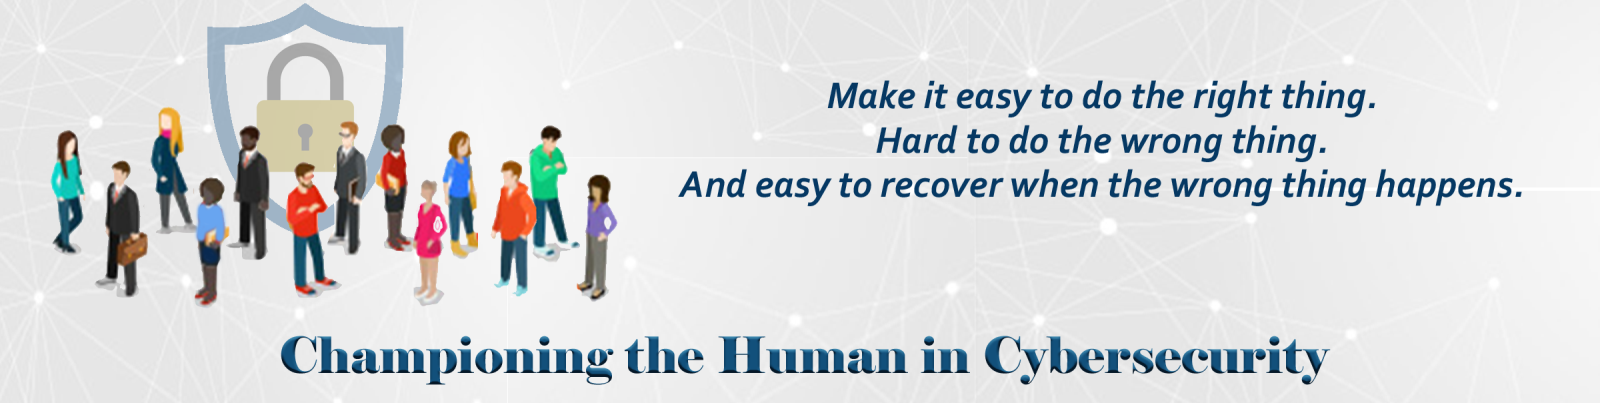 Make it easy to do the right thing, hard to do the wrong thing, and easy to recover when the wrong thing happens. Championing the human in cybersecurity.